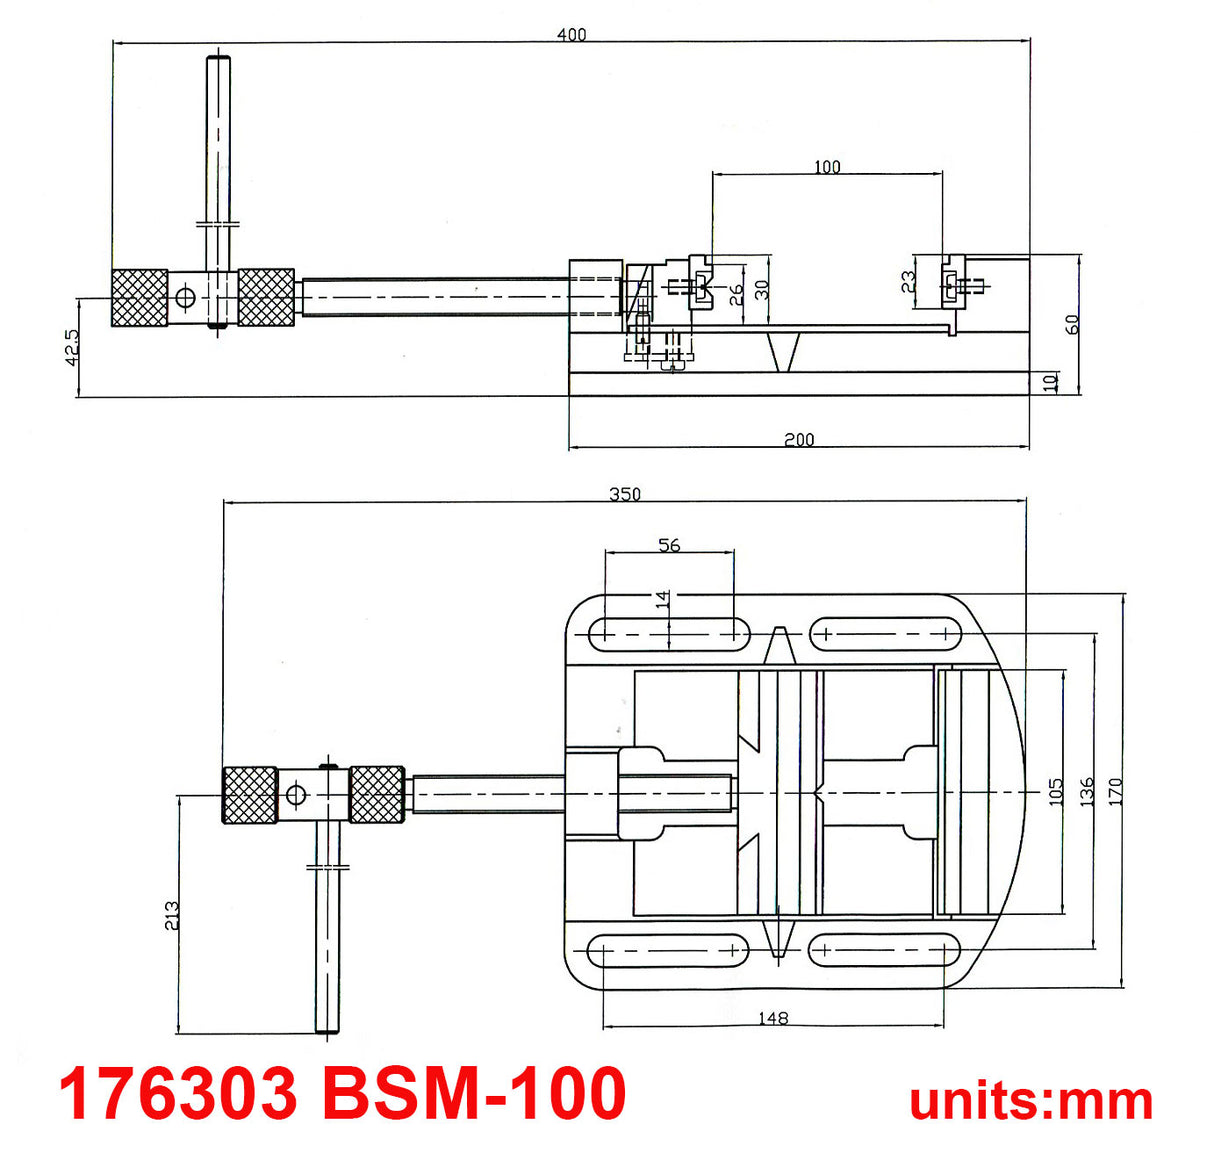 KANG Industrial BSM-100, 100mm Cast Iron Drill Press Clamp Machine Vise, Precise Drilling Press Vise